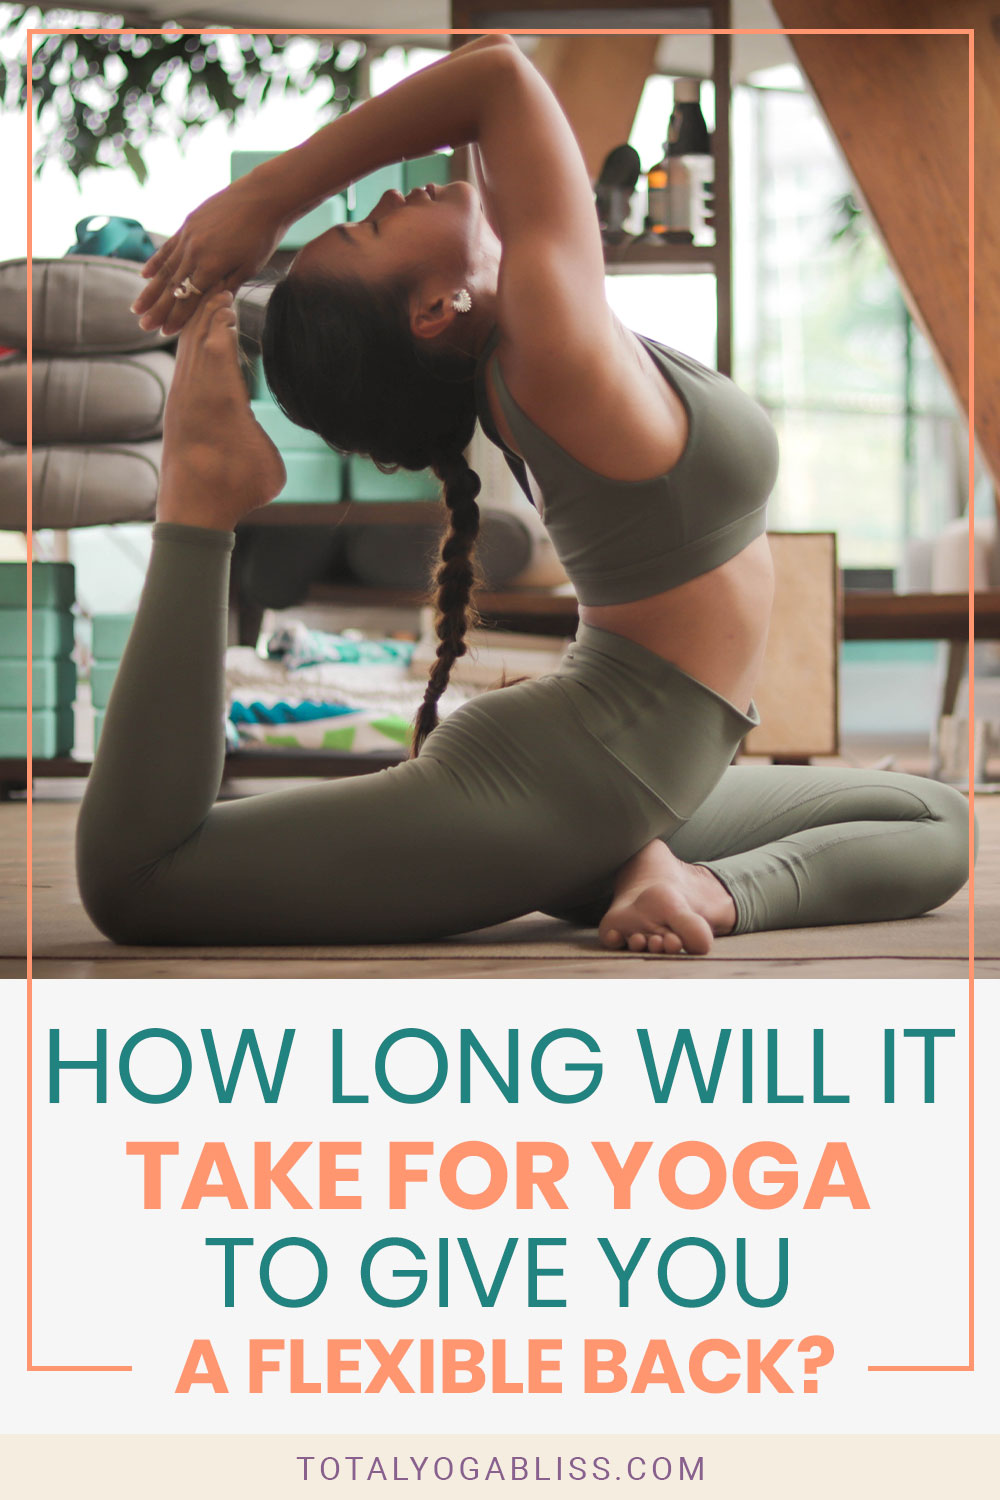 Woman in olive color yoga suite - How Long Will it Take For Yoga to Give You a Flexible Back?